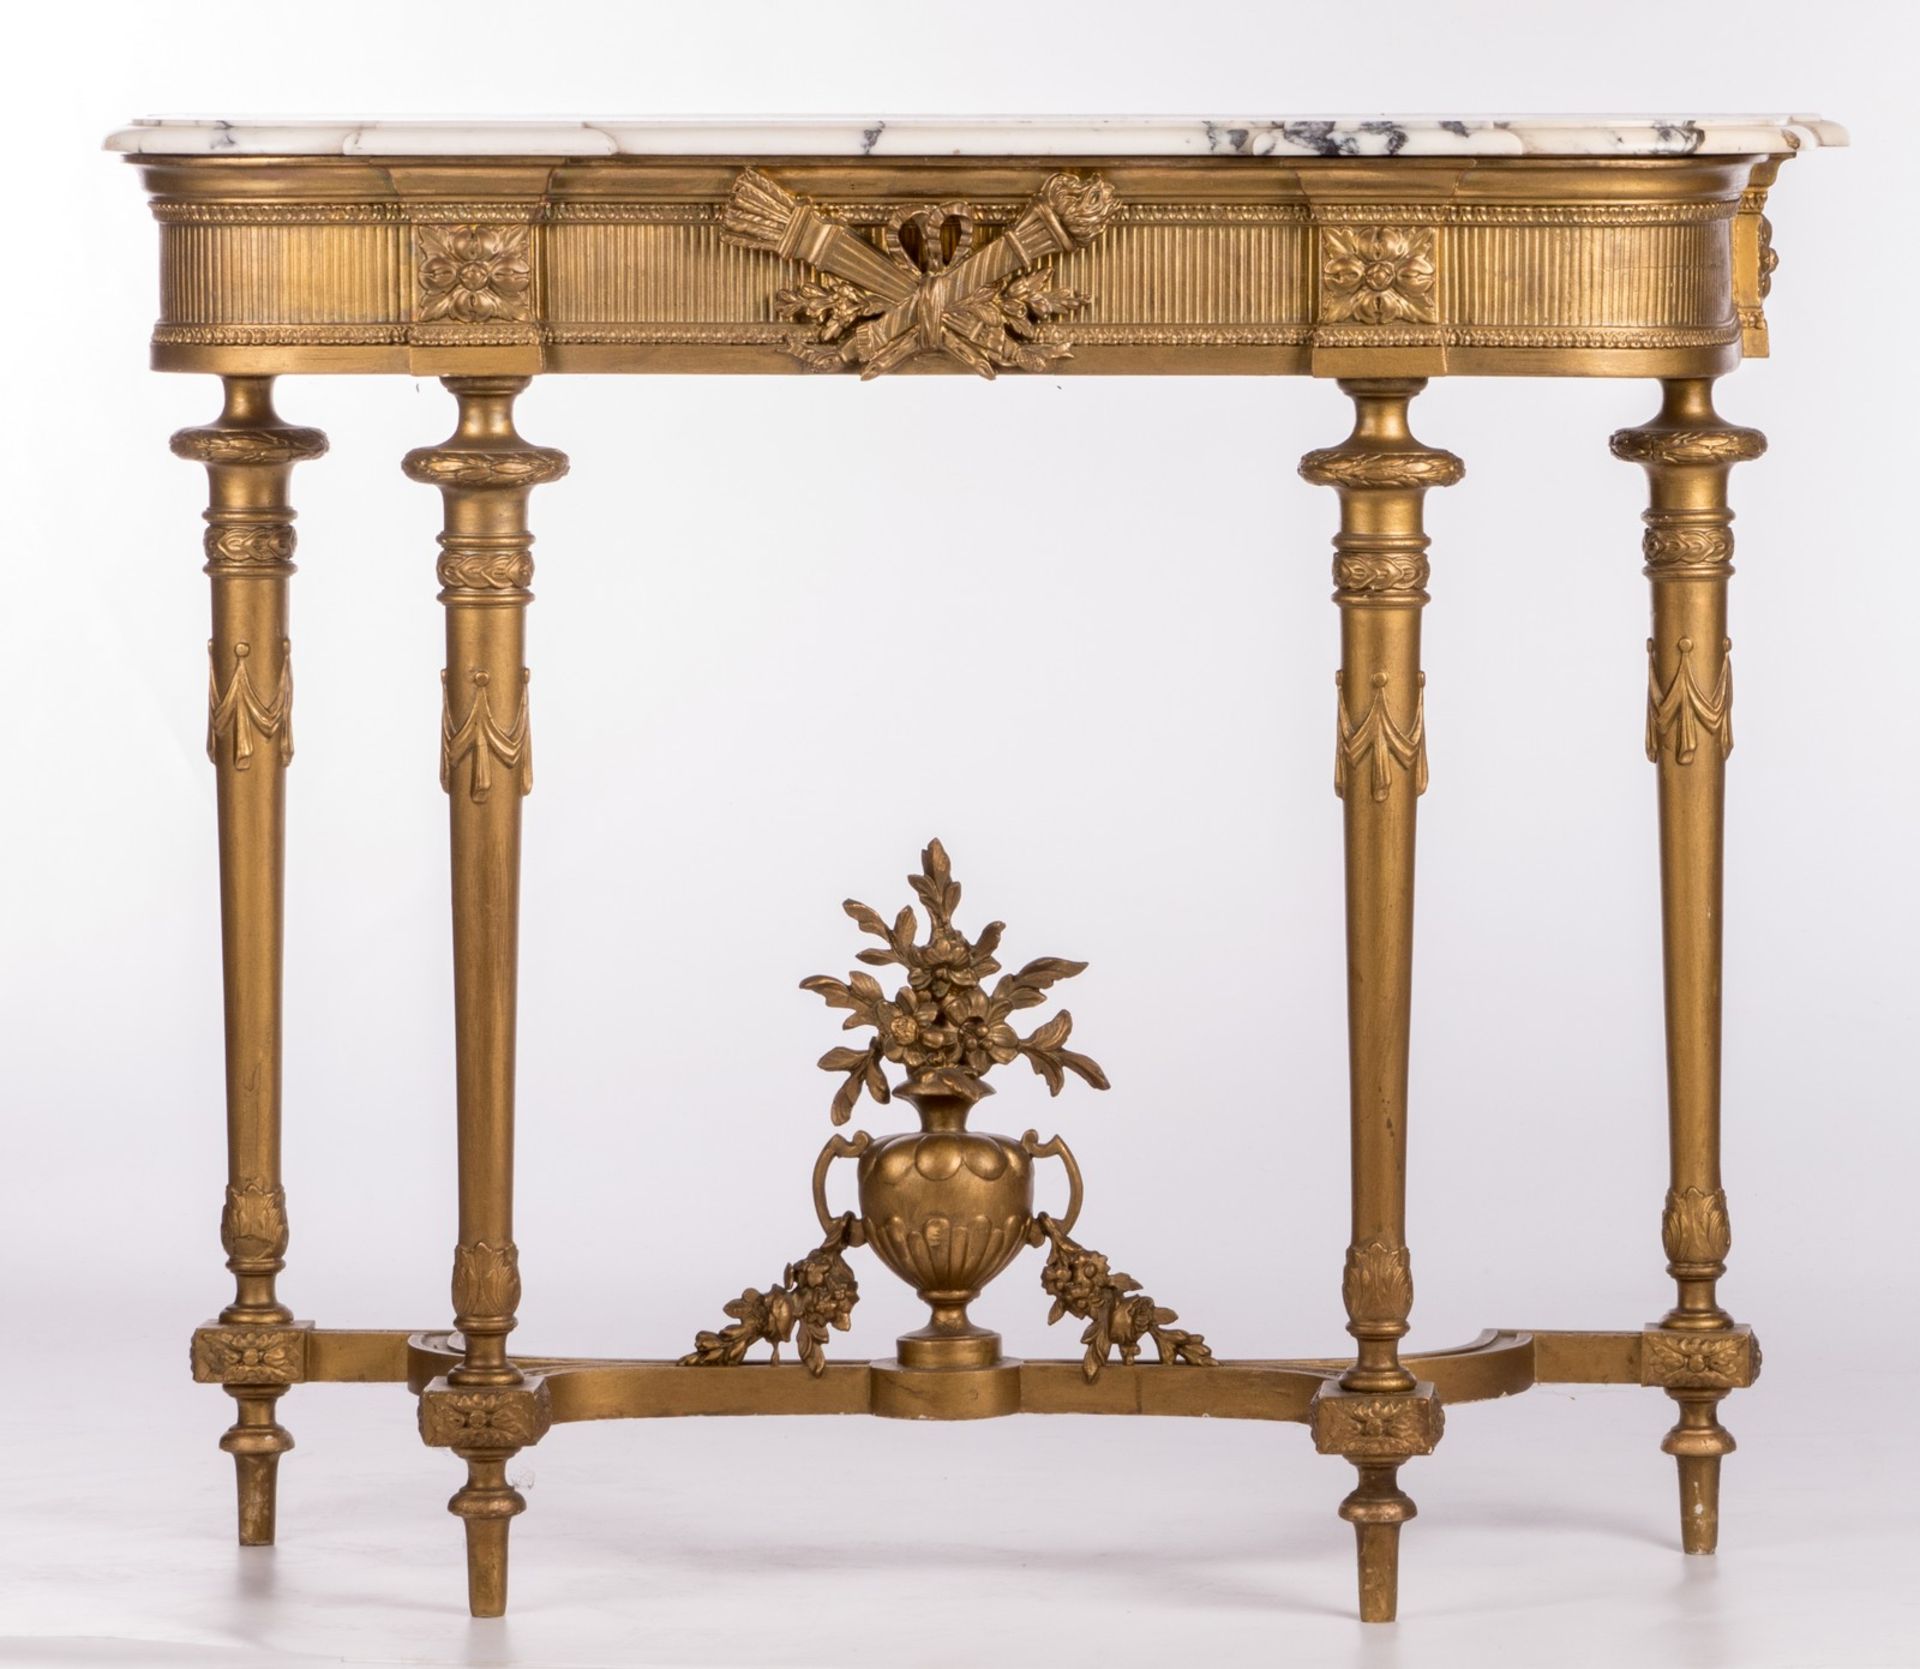 A neoclassical gilt wood console table with yellow Sienna marble top, H 90,5 - W 10 8 -D 43 cm - Bild 2 aus 11